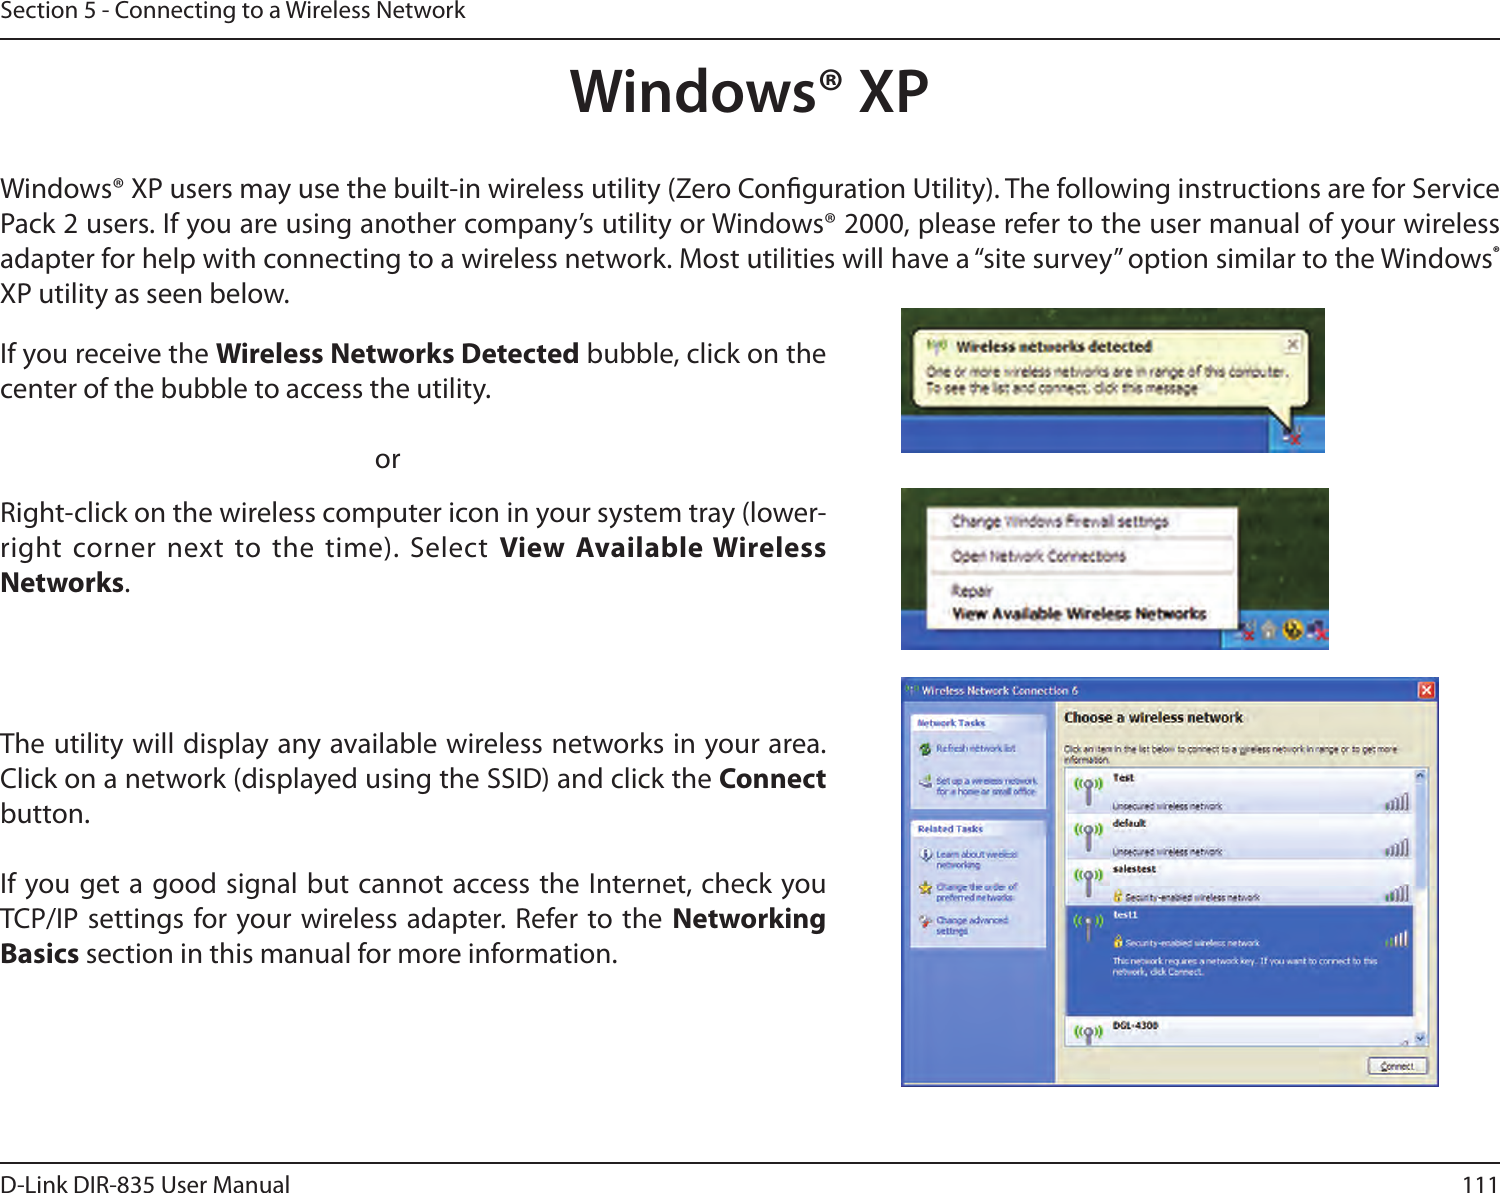 111D-Link DIR-835 User ManualSection 5 - Connecting to a Wireless NetworkWindows® XPWindows® XP users may use the built-in wireless utility (Zero Conguration Utility). The following instructions are for Service Pack 2 users. If you are using another company’s utility or Windows® 2000, please refer to the user manual of your wireless adapter for help with connecting to a wireless network. Most utilities will have a “site survey” option similar to the Windows® XP utility as seen below.Right-click on the wireless computer icon in your system tray (lower-right corner next to the time).  Select  View Available Wireless Networks.If you receive the Wireless Networks Detected bubble, click on the center of the bubble to access the utility.     orThe utility will display any available wireless networks in your area. Click on a network (displayed using the SSID) and click the Connect button.If you get a good signal but cannot access the Internet, check you TCP/IP settings for your wireless adapter. Refer to the  Networking Basics section in this manual for more information.